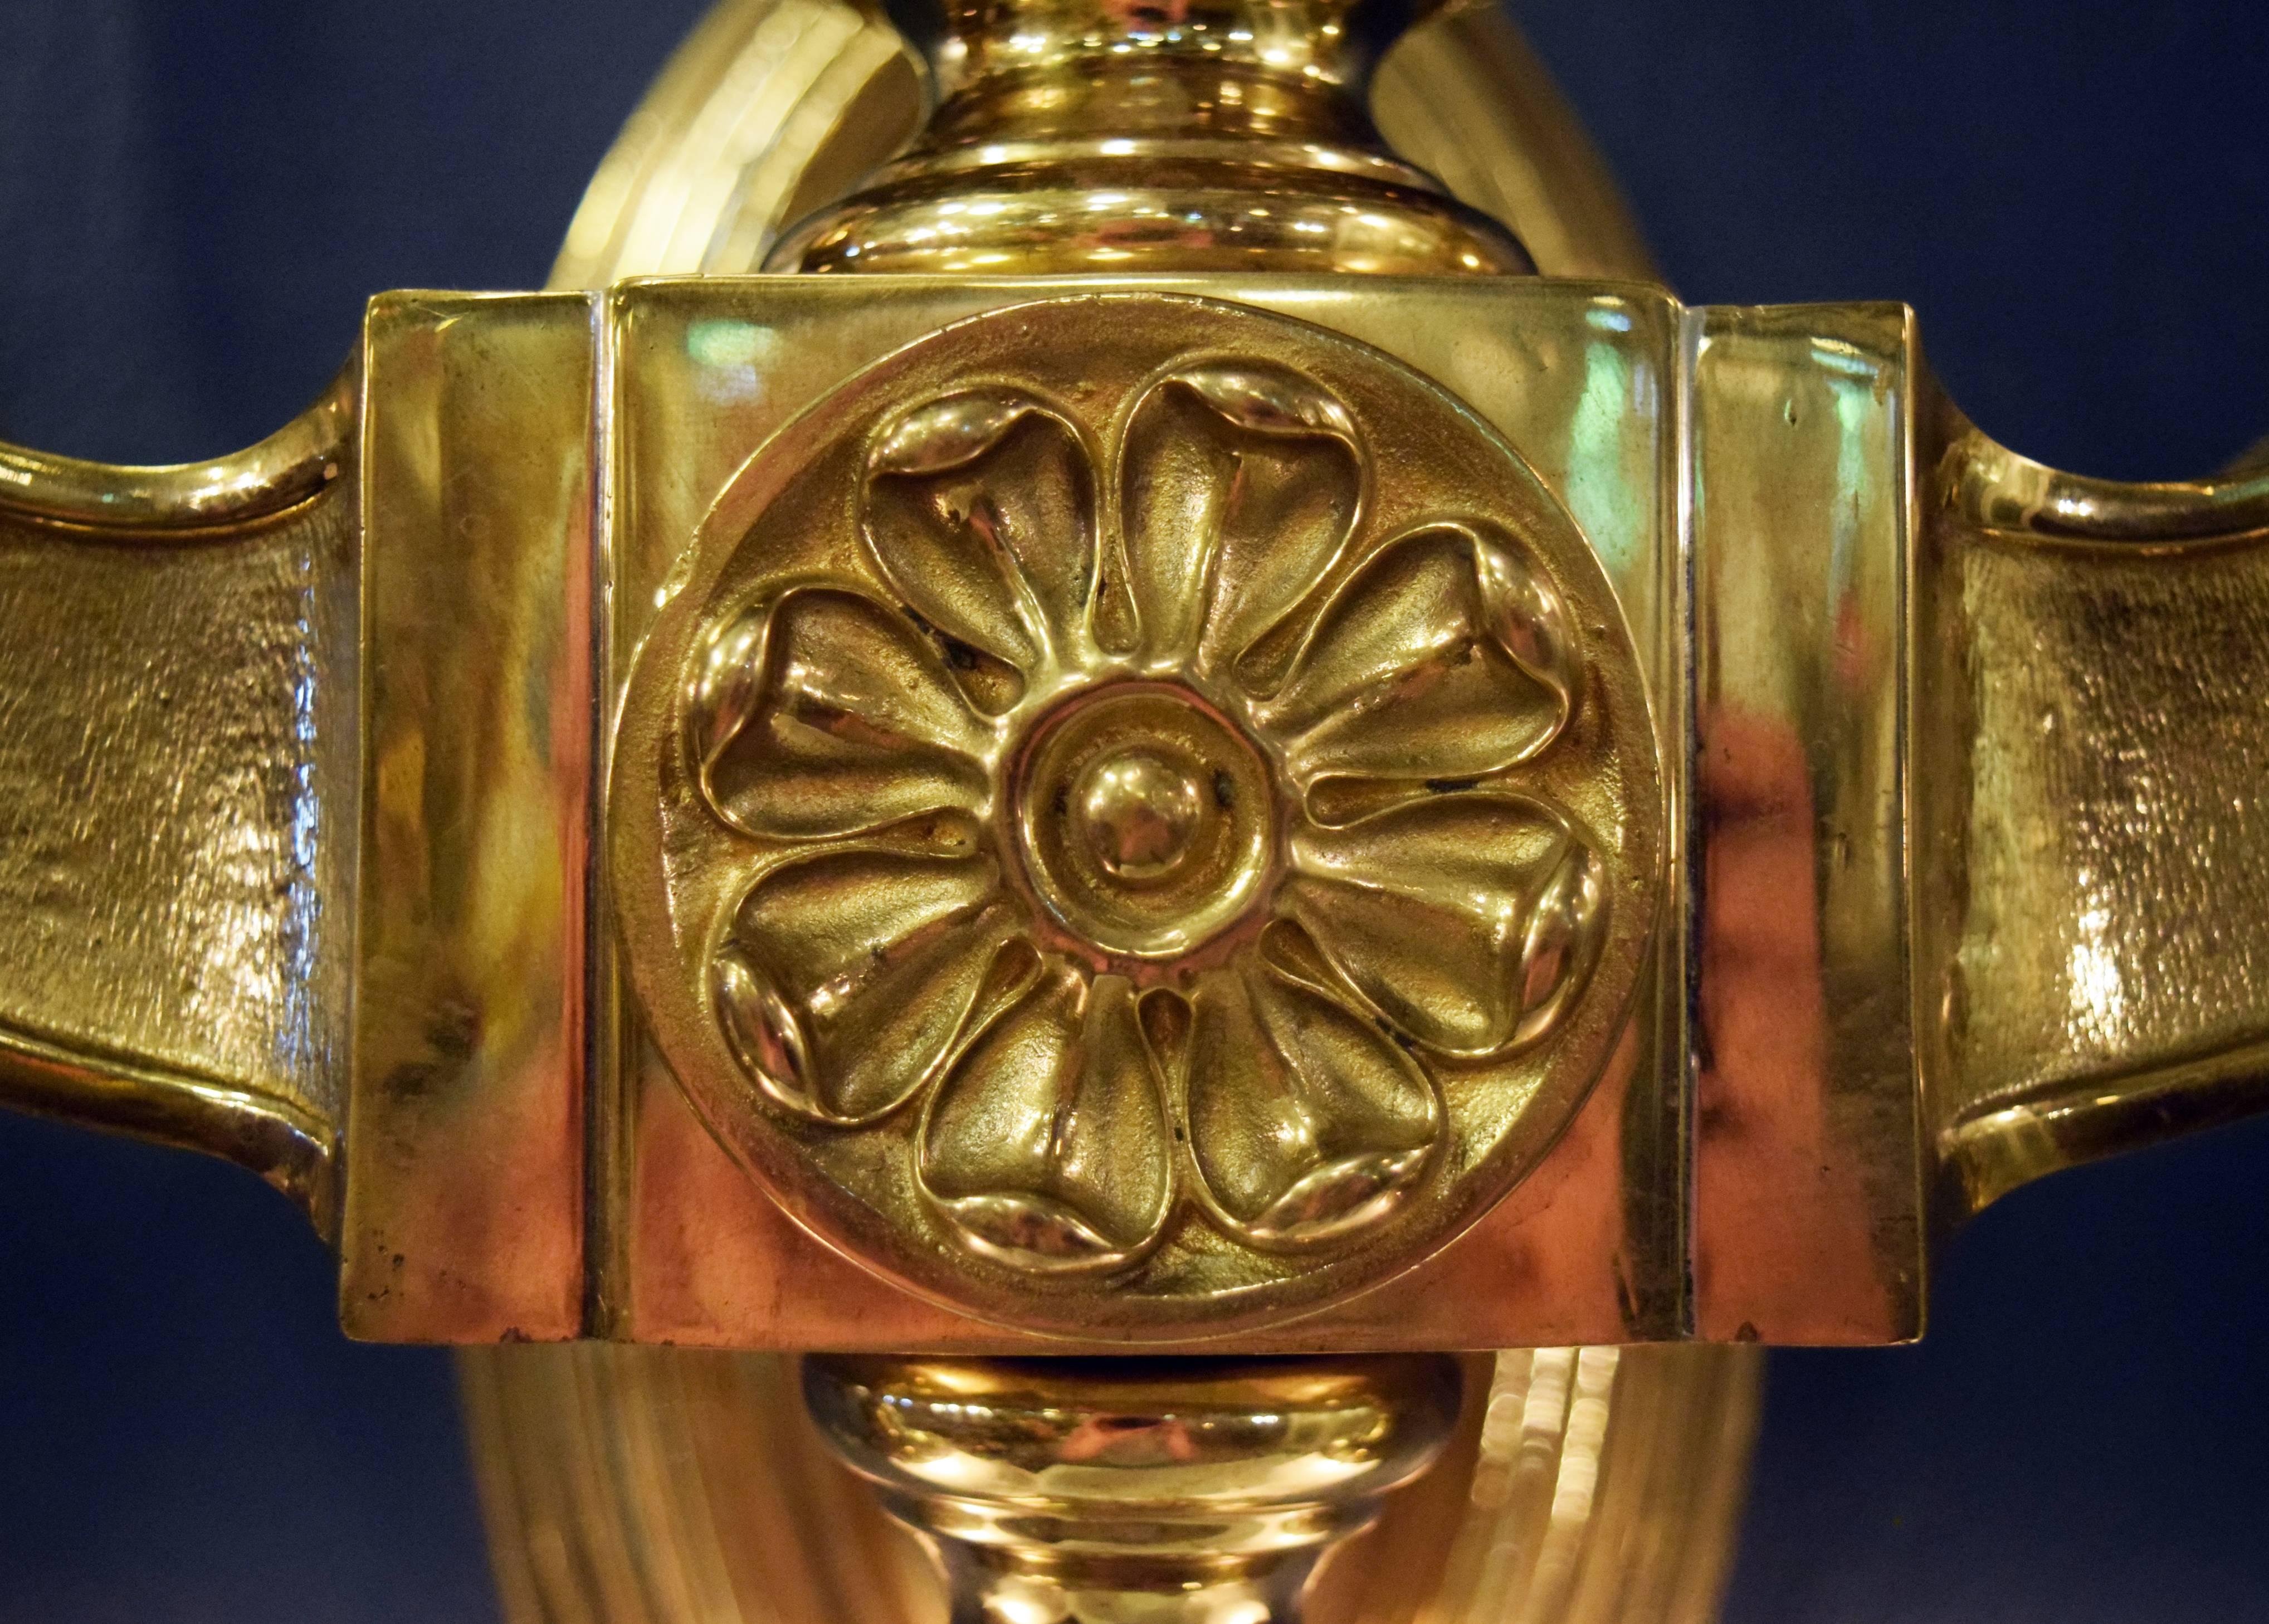 These heavy cast brass neoclassical sconces are wonderfully unique and feature beautiful decoration throughout! The elegant, delicate floral decoration on the center of the body along with other organic, curving design elements balance out the heavy